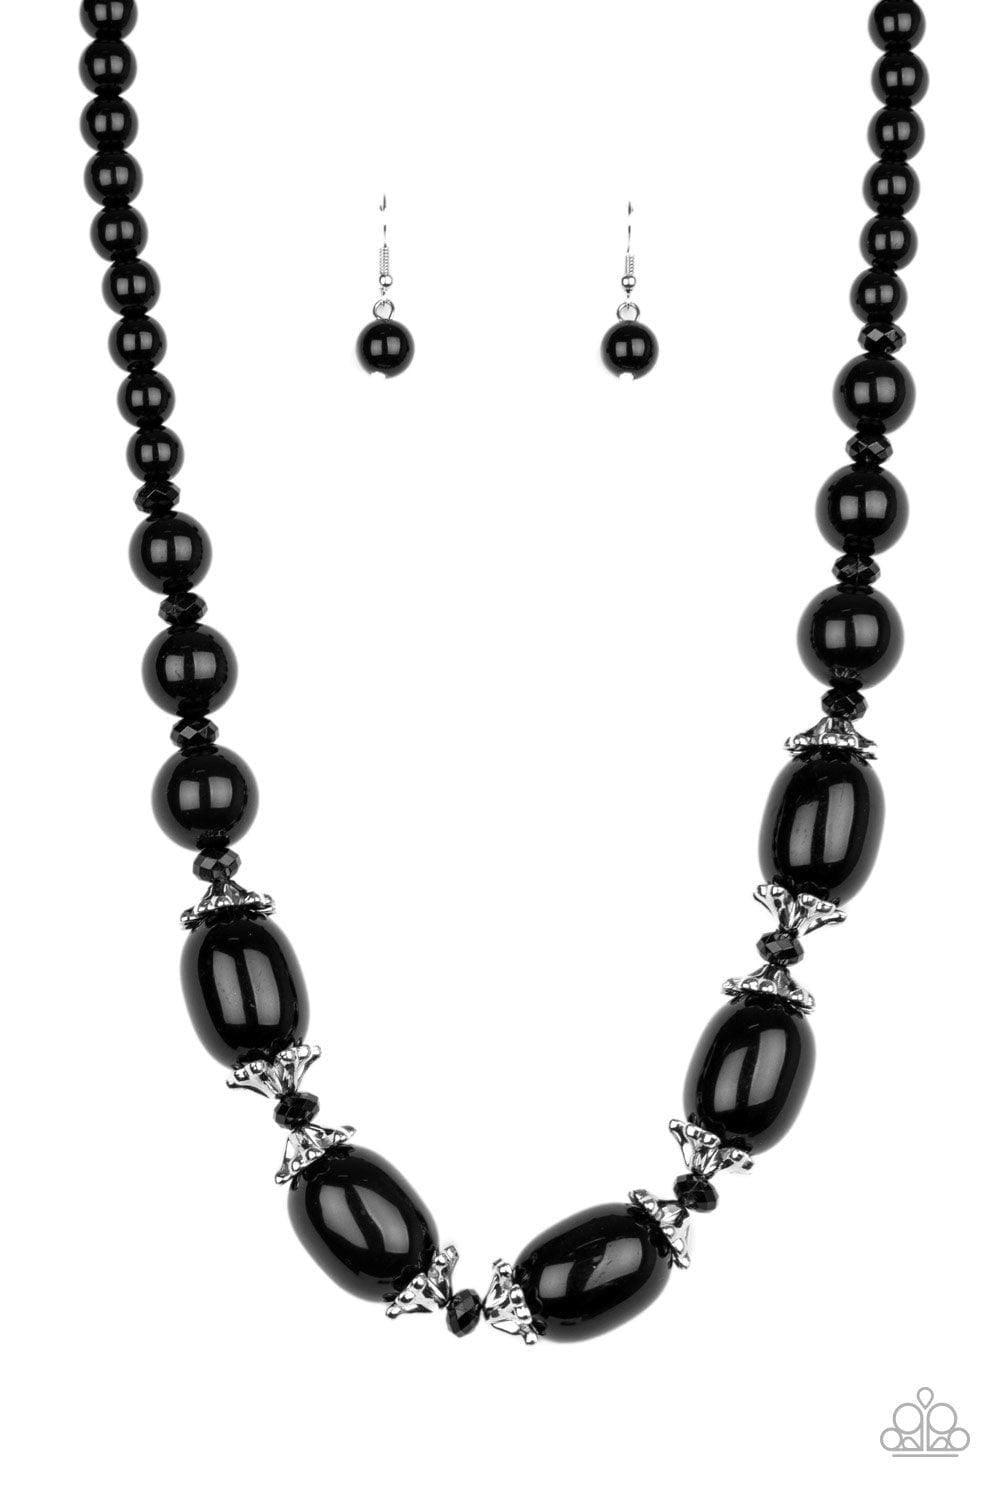 Paparazzi Accessories - After Party Posh - Black Necklace - Bling by JessieK